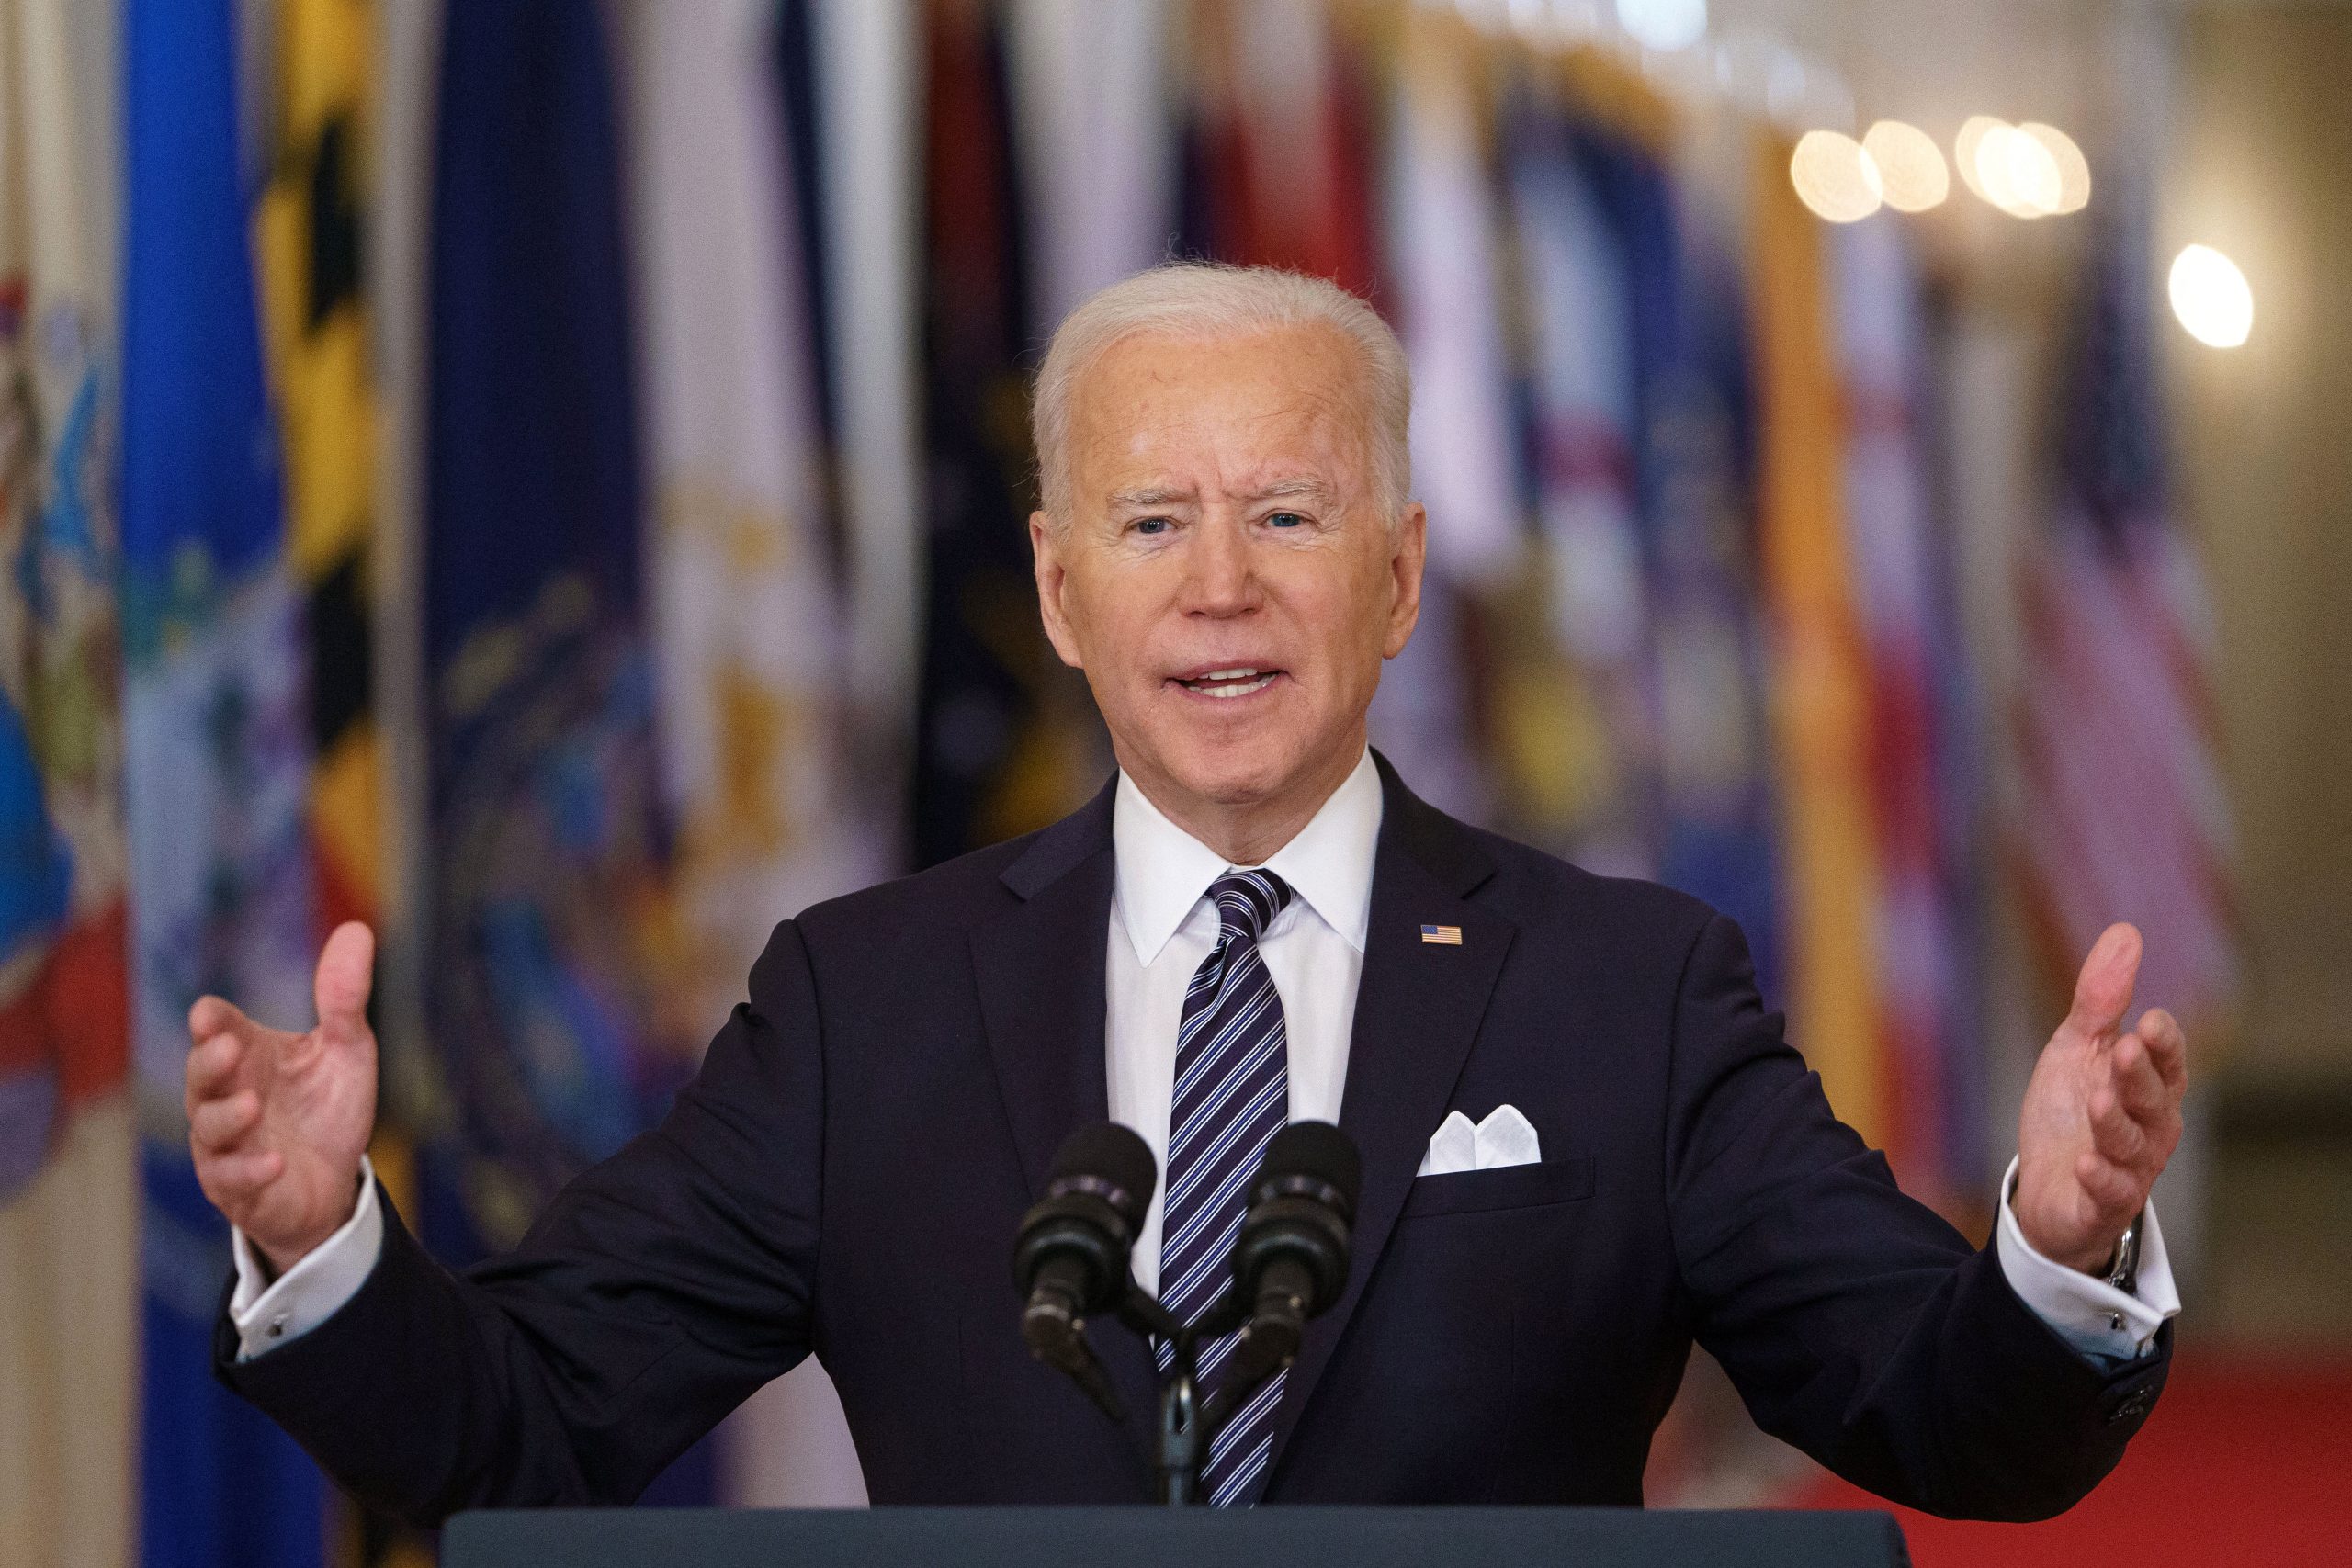 ‘Let us see what investigation brings us’: Joe Biden on Andrew Cuomo